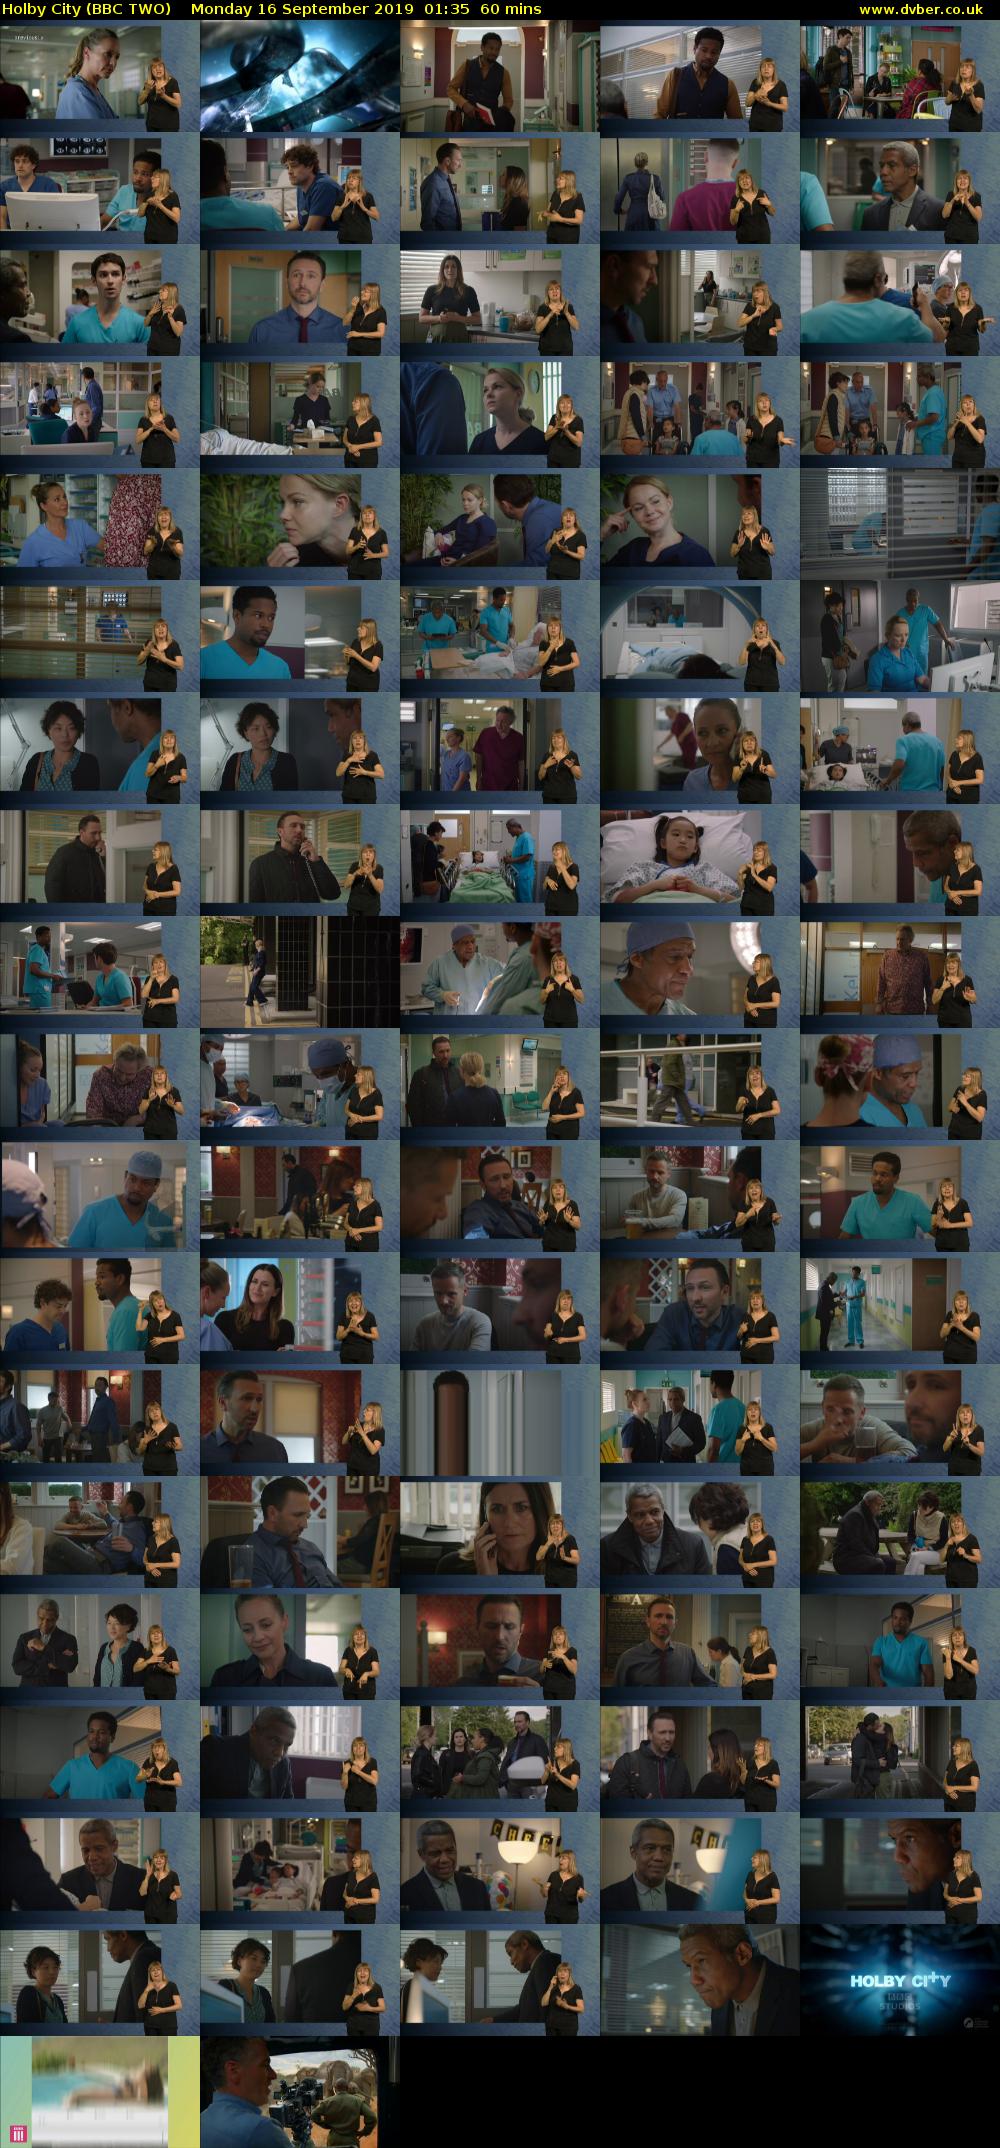 Holby City (BBC TWO) Monday 16 September 2019 01:35 - 02:35